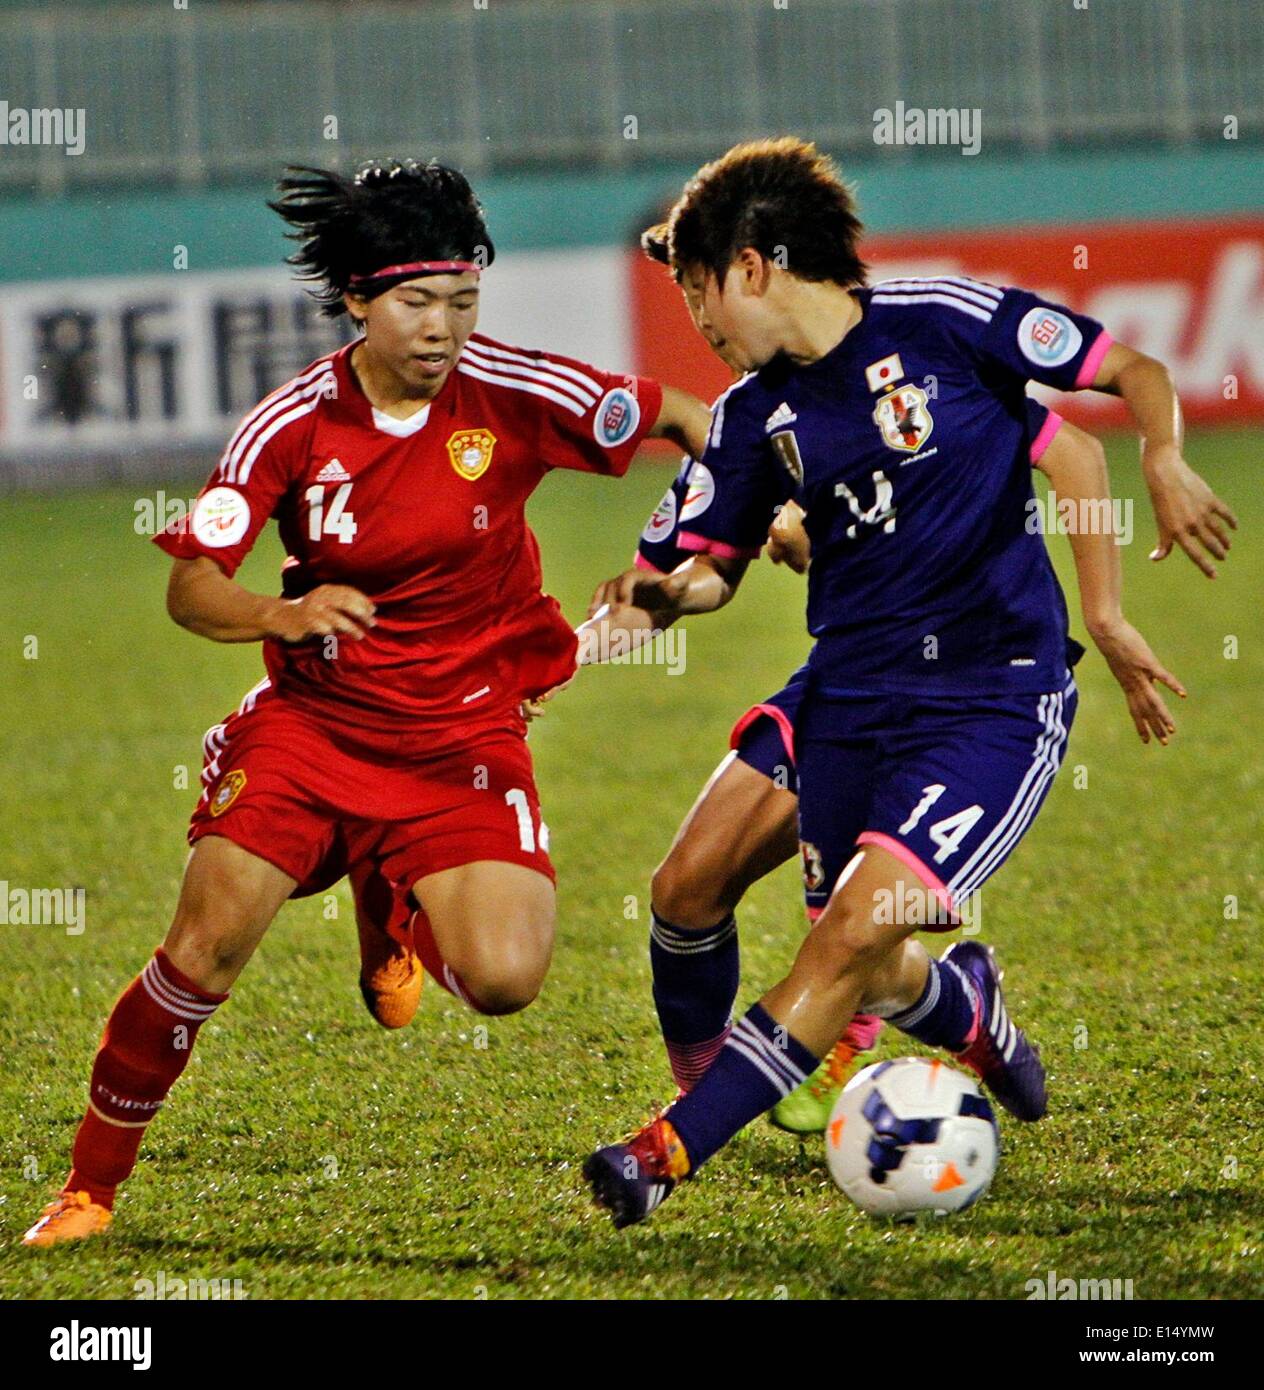 Ho Chi Minh City, Vietnam. 22nd May, 2014. Player Gu Yasha (L) of China vies for the ball during the semi-final against Japan during the 2014 Asian Football Confederation (AFC) Women's Asian Cup at Thong Nhat Stadium in Ho Chi Minh City, Vietnam, on May 22, 2014. Japan advanced to final after beating China 2-1. © Nguyen Le Huyen/Xinhua/Alamy Live News Stock Photo